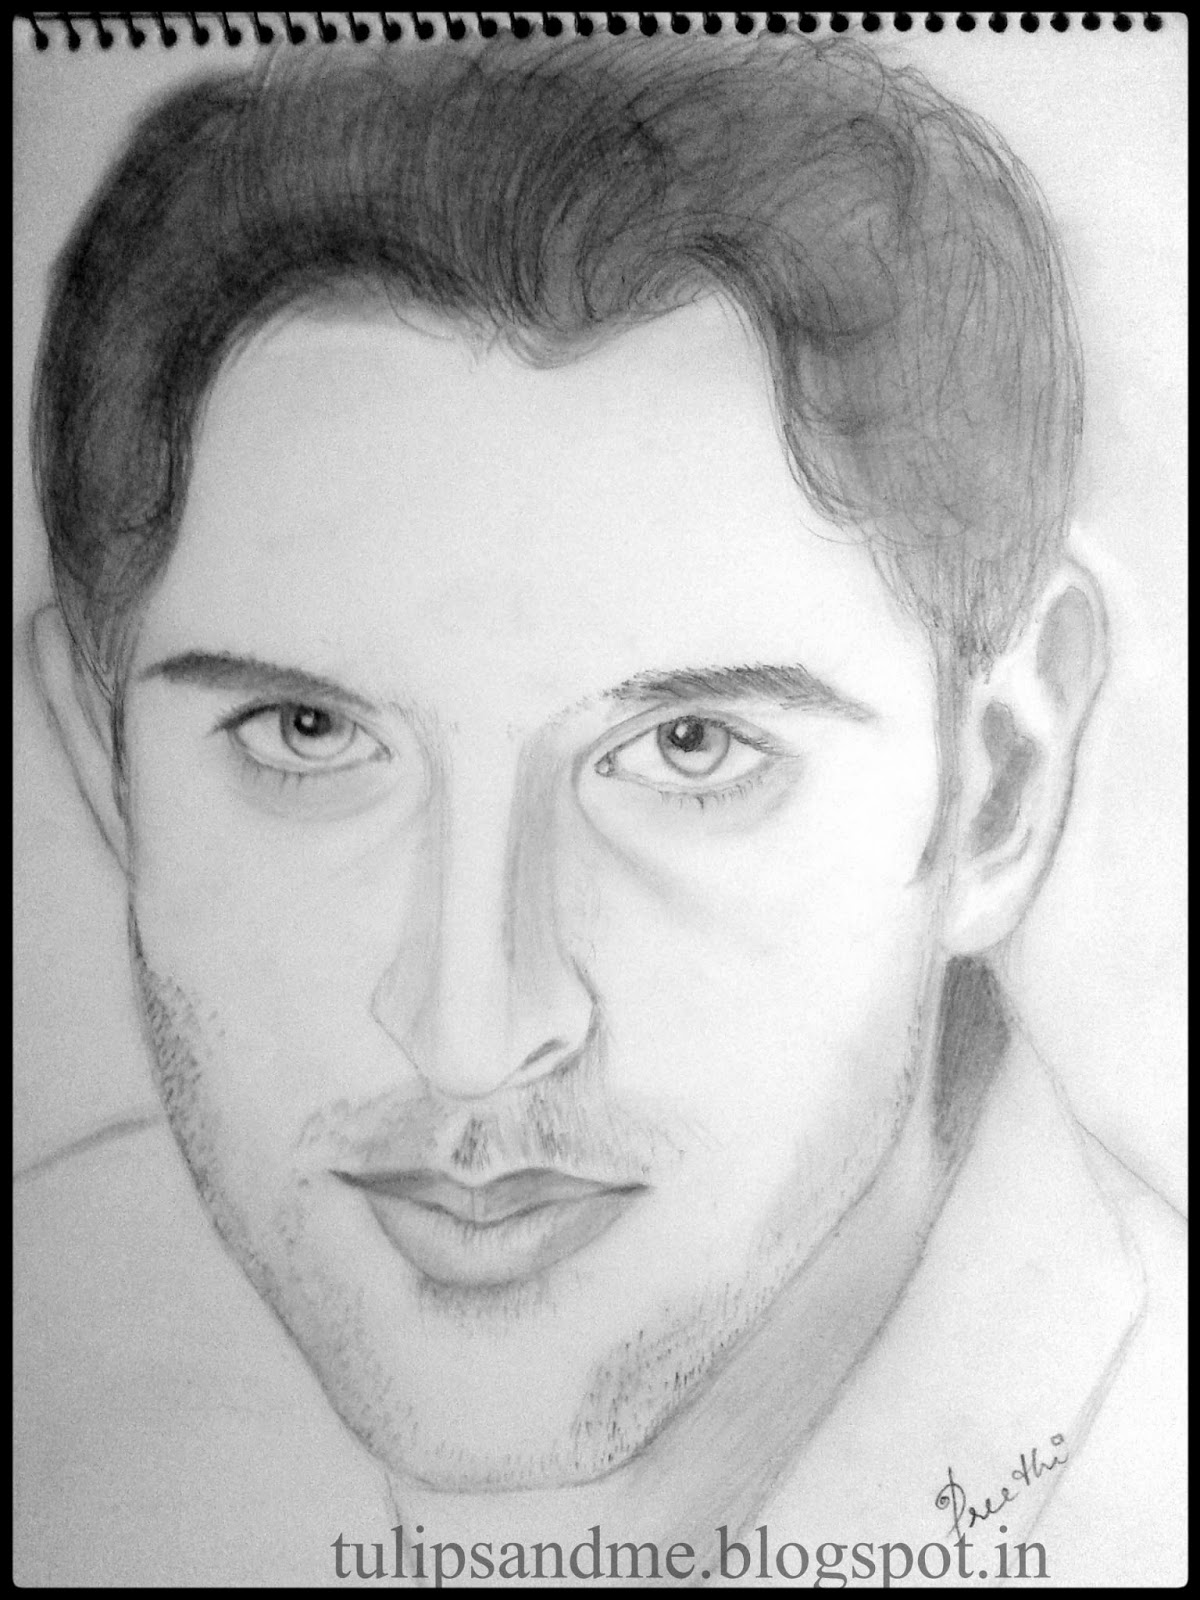 How to draw Hrithik Roshan  Step by step to draw Hrithik Roshan  Hrithik  Roshan  YouTube